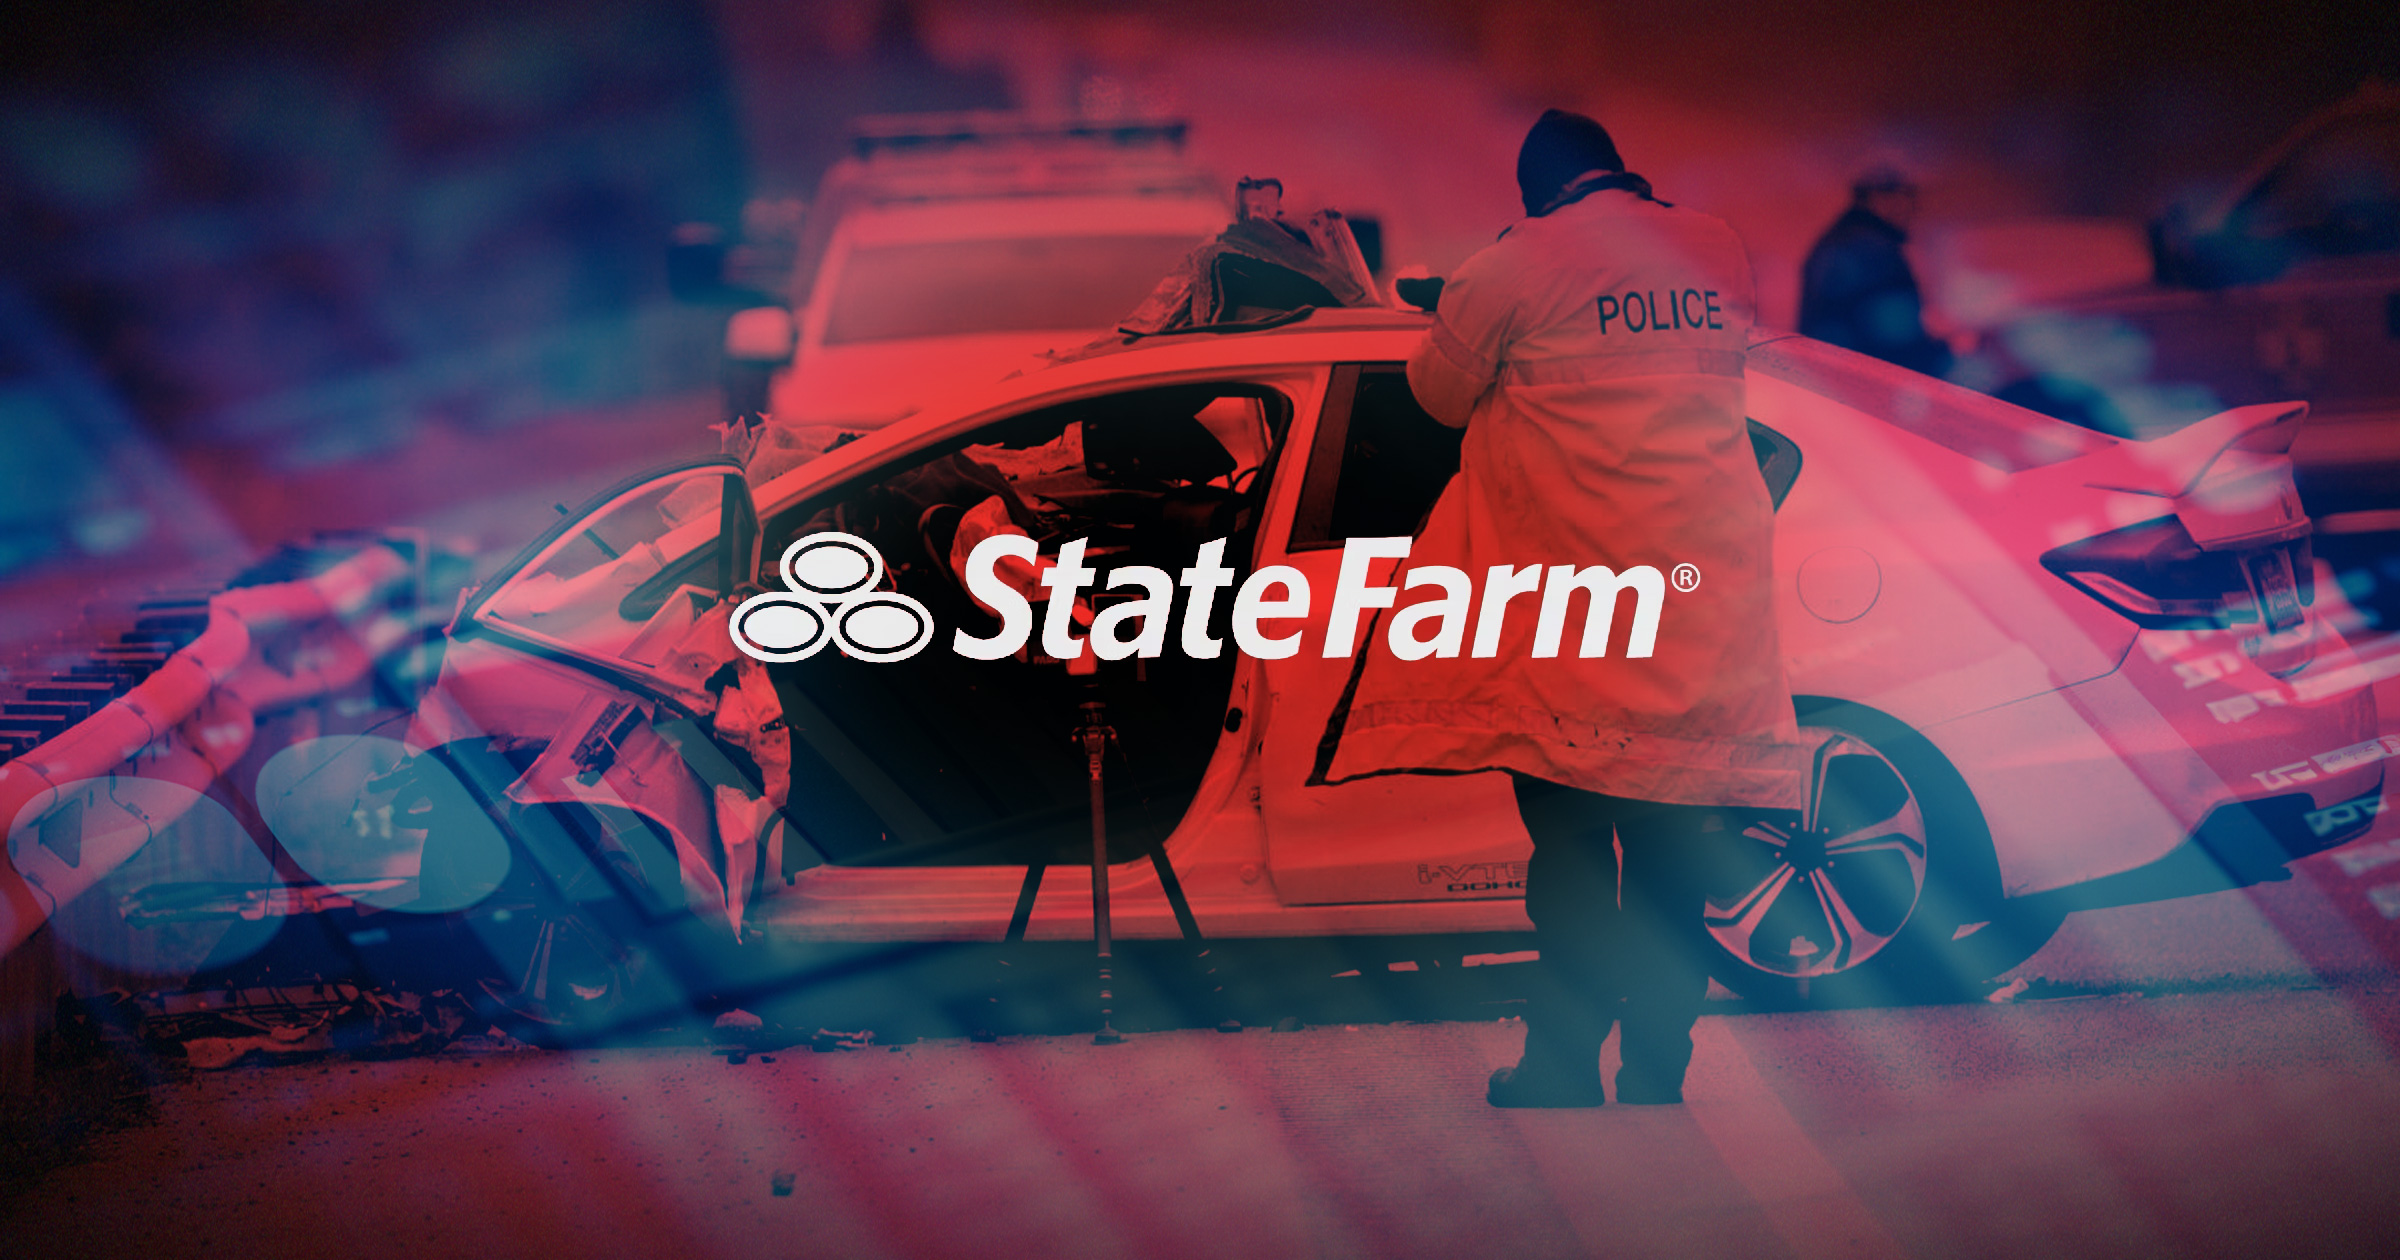 Image shows the State Farm logo over a picture of a crash.